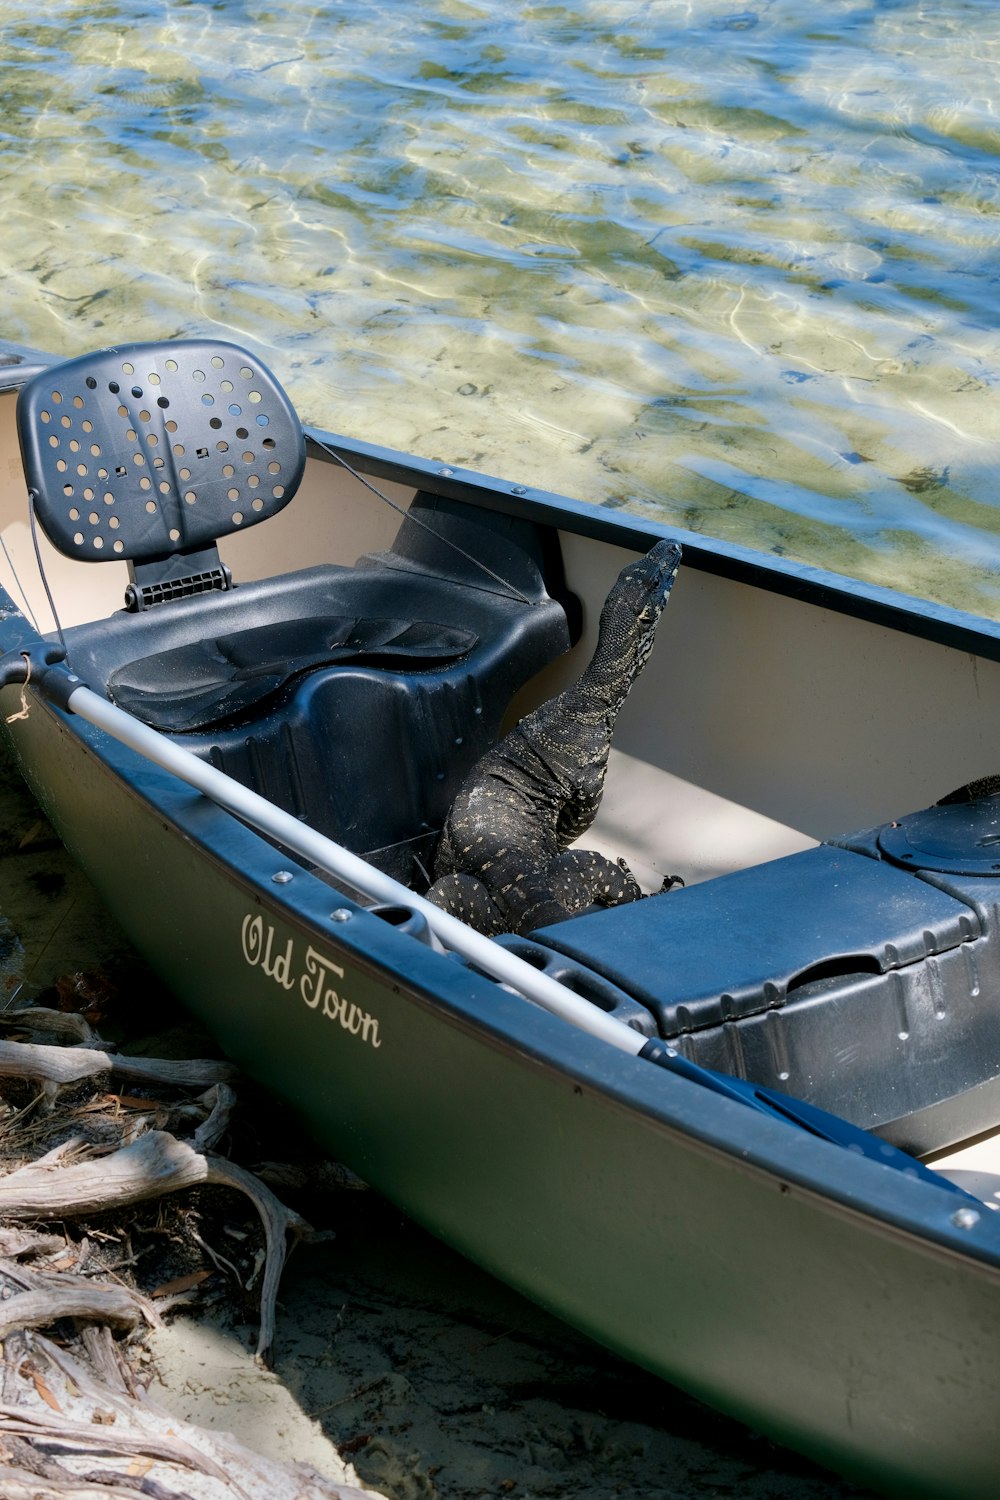 a small boat with an alligator in it on the water